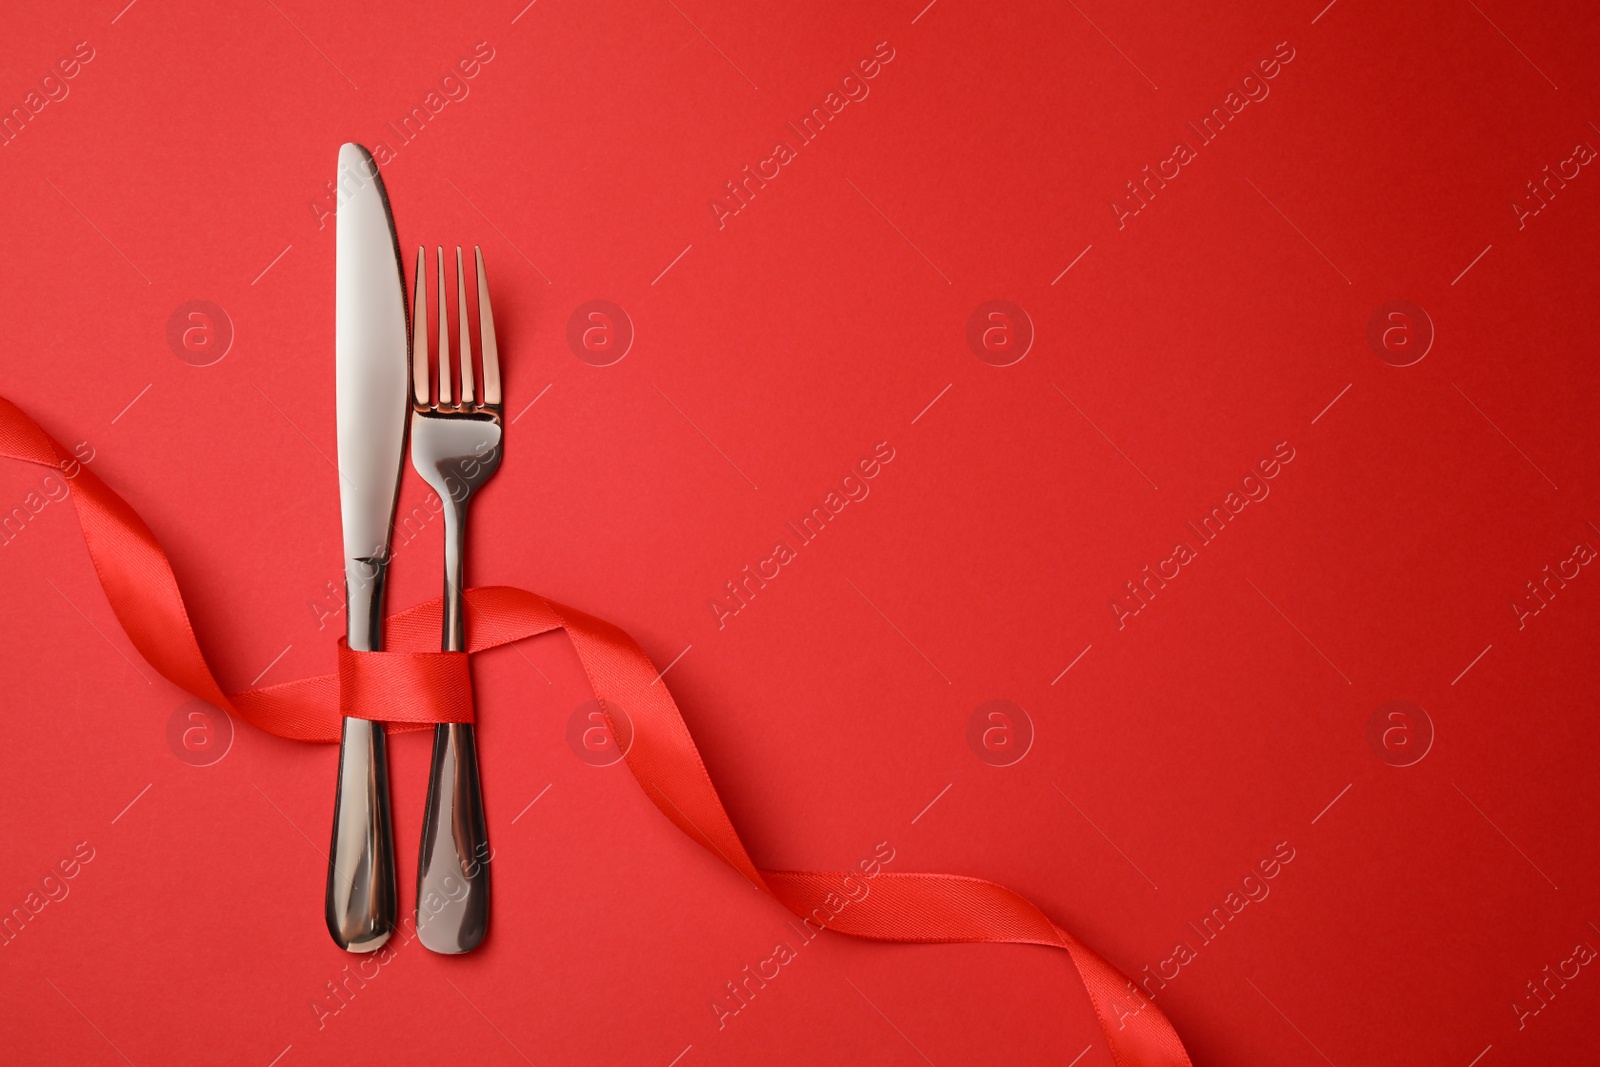 Photo of Cutlery set with ribbon on red background, flat lay and space for text. Romantic table setting